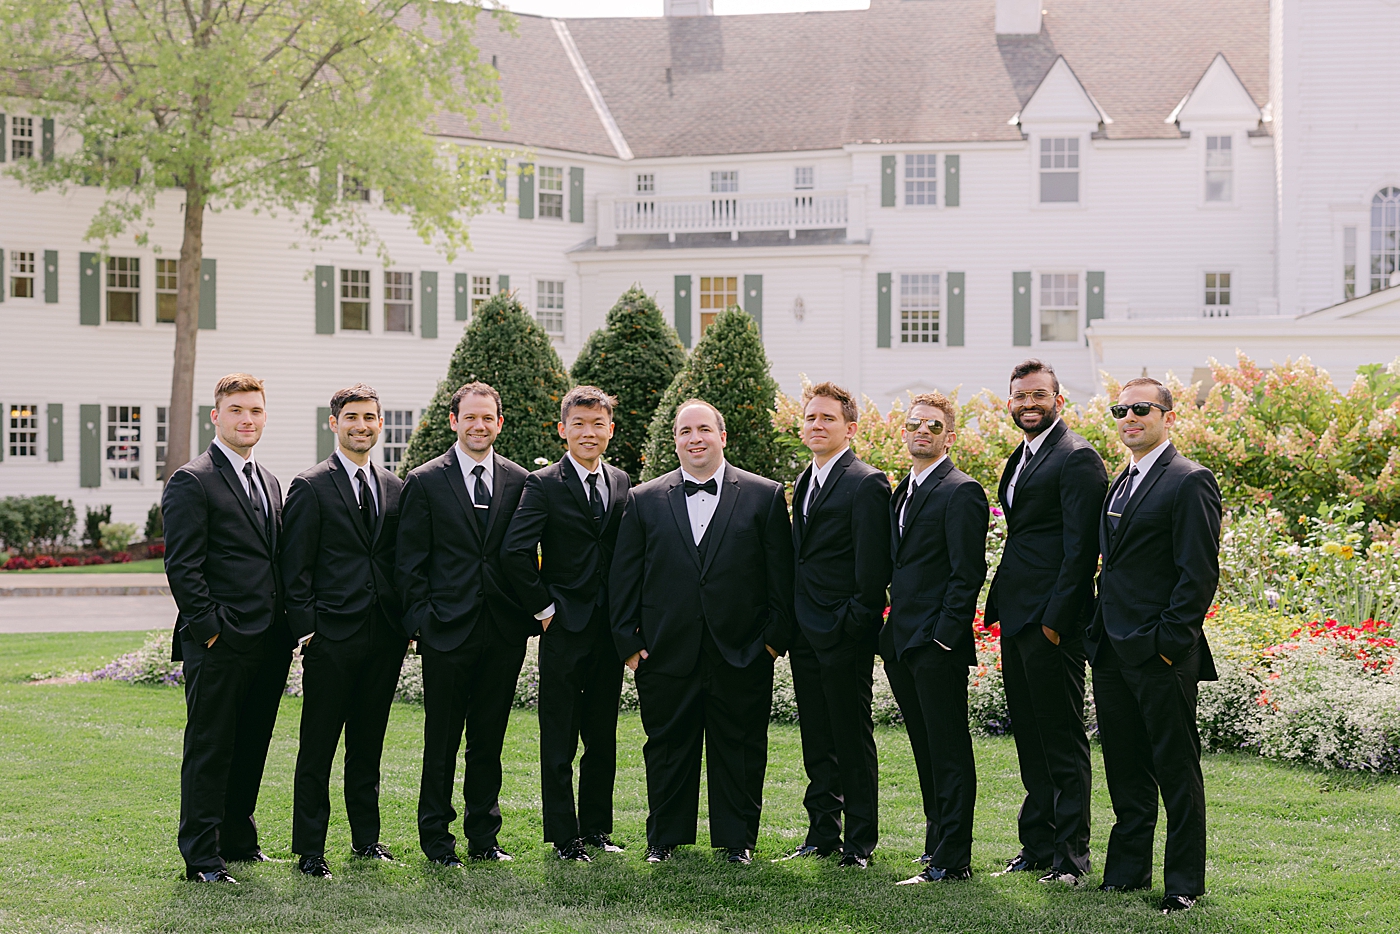 Formal portrait of a groom and his groomsmen outdoors | Image by Hope Helmuth Photography